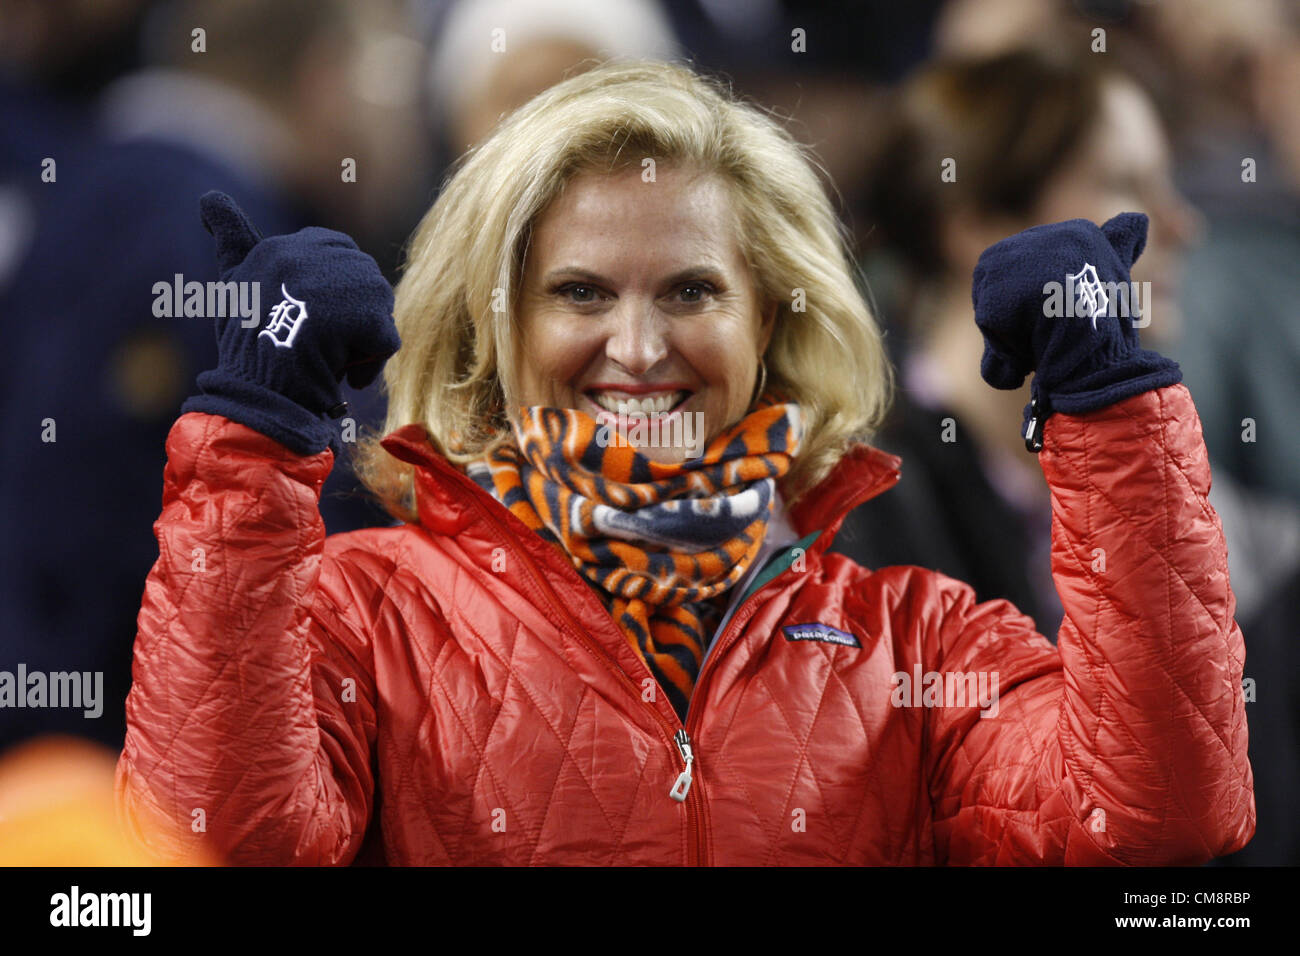 28.10.2012. Detroit, Michigan, USA. Ann Romney, wife of Republican presidential candidate Mitt Romney, shows off her Detroit gloves at Game 4 of the 2012 World Series between the Detroit Tigers and the San Francisco Giants at Comerica Park in Detroit, Michigan, Sunday, October 28, 2012. Stock Photo